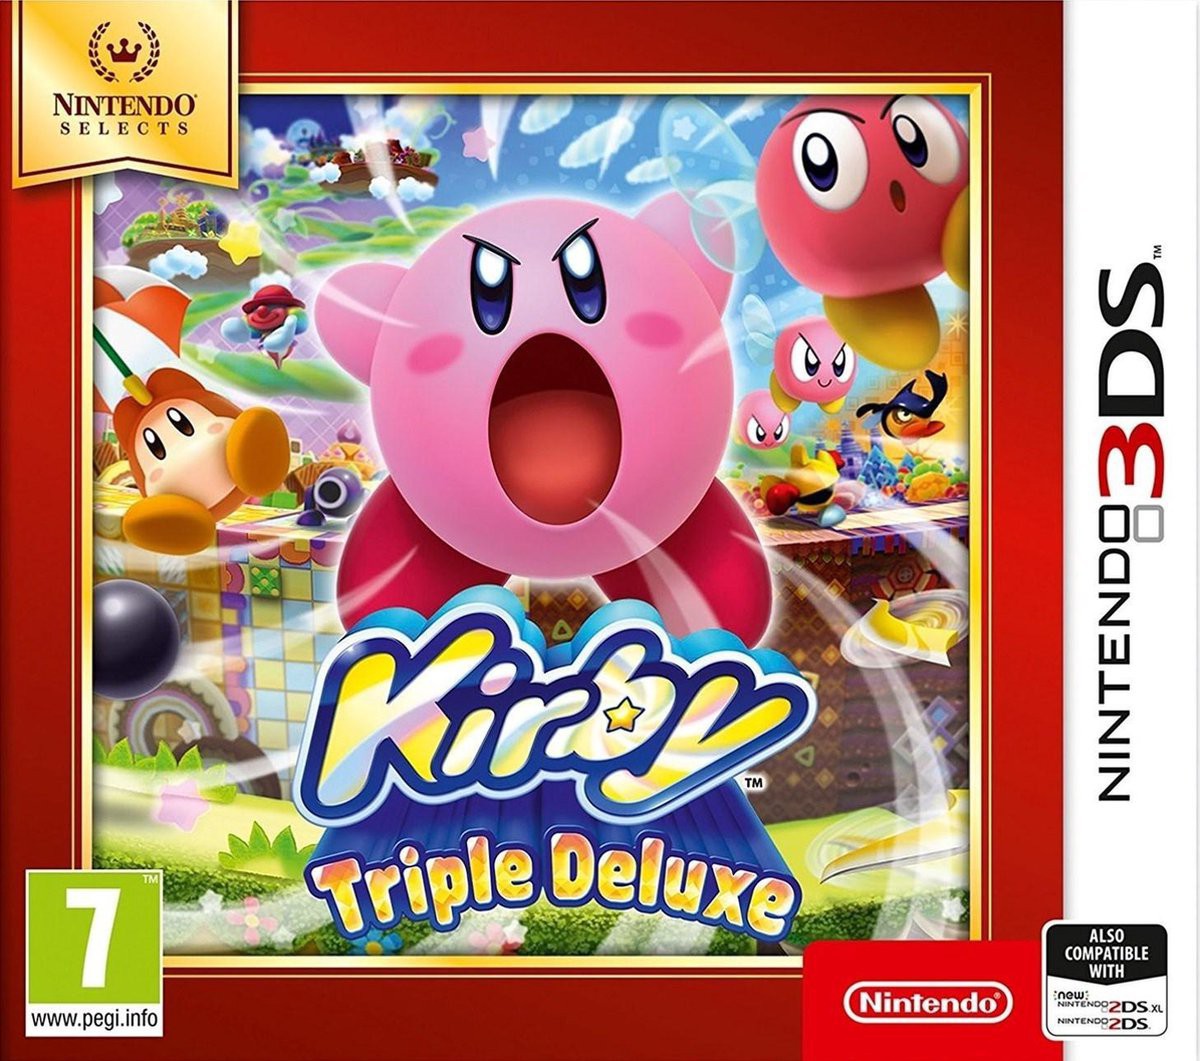 Kirby - Triple Deluxe (Nintendo Selects) - Nintendo 3DS Games